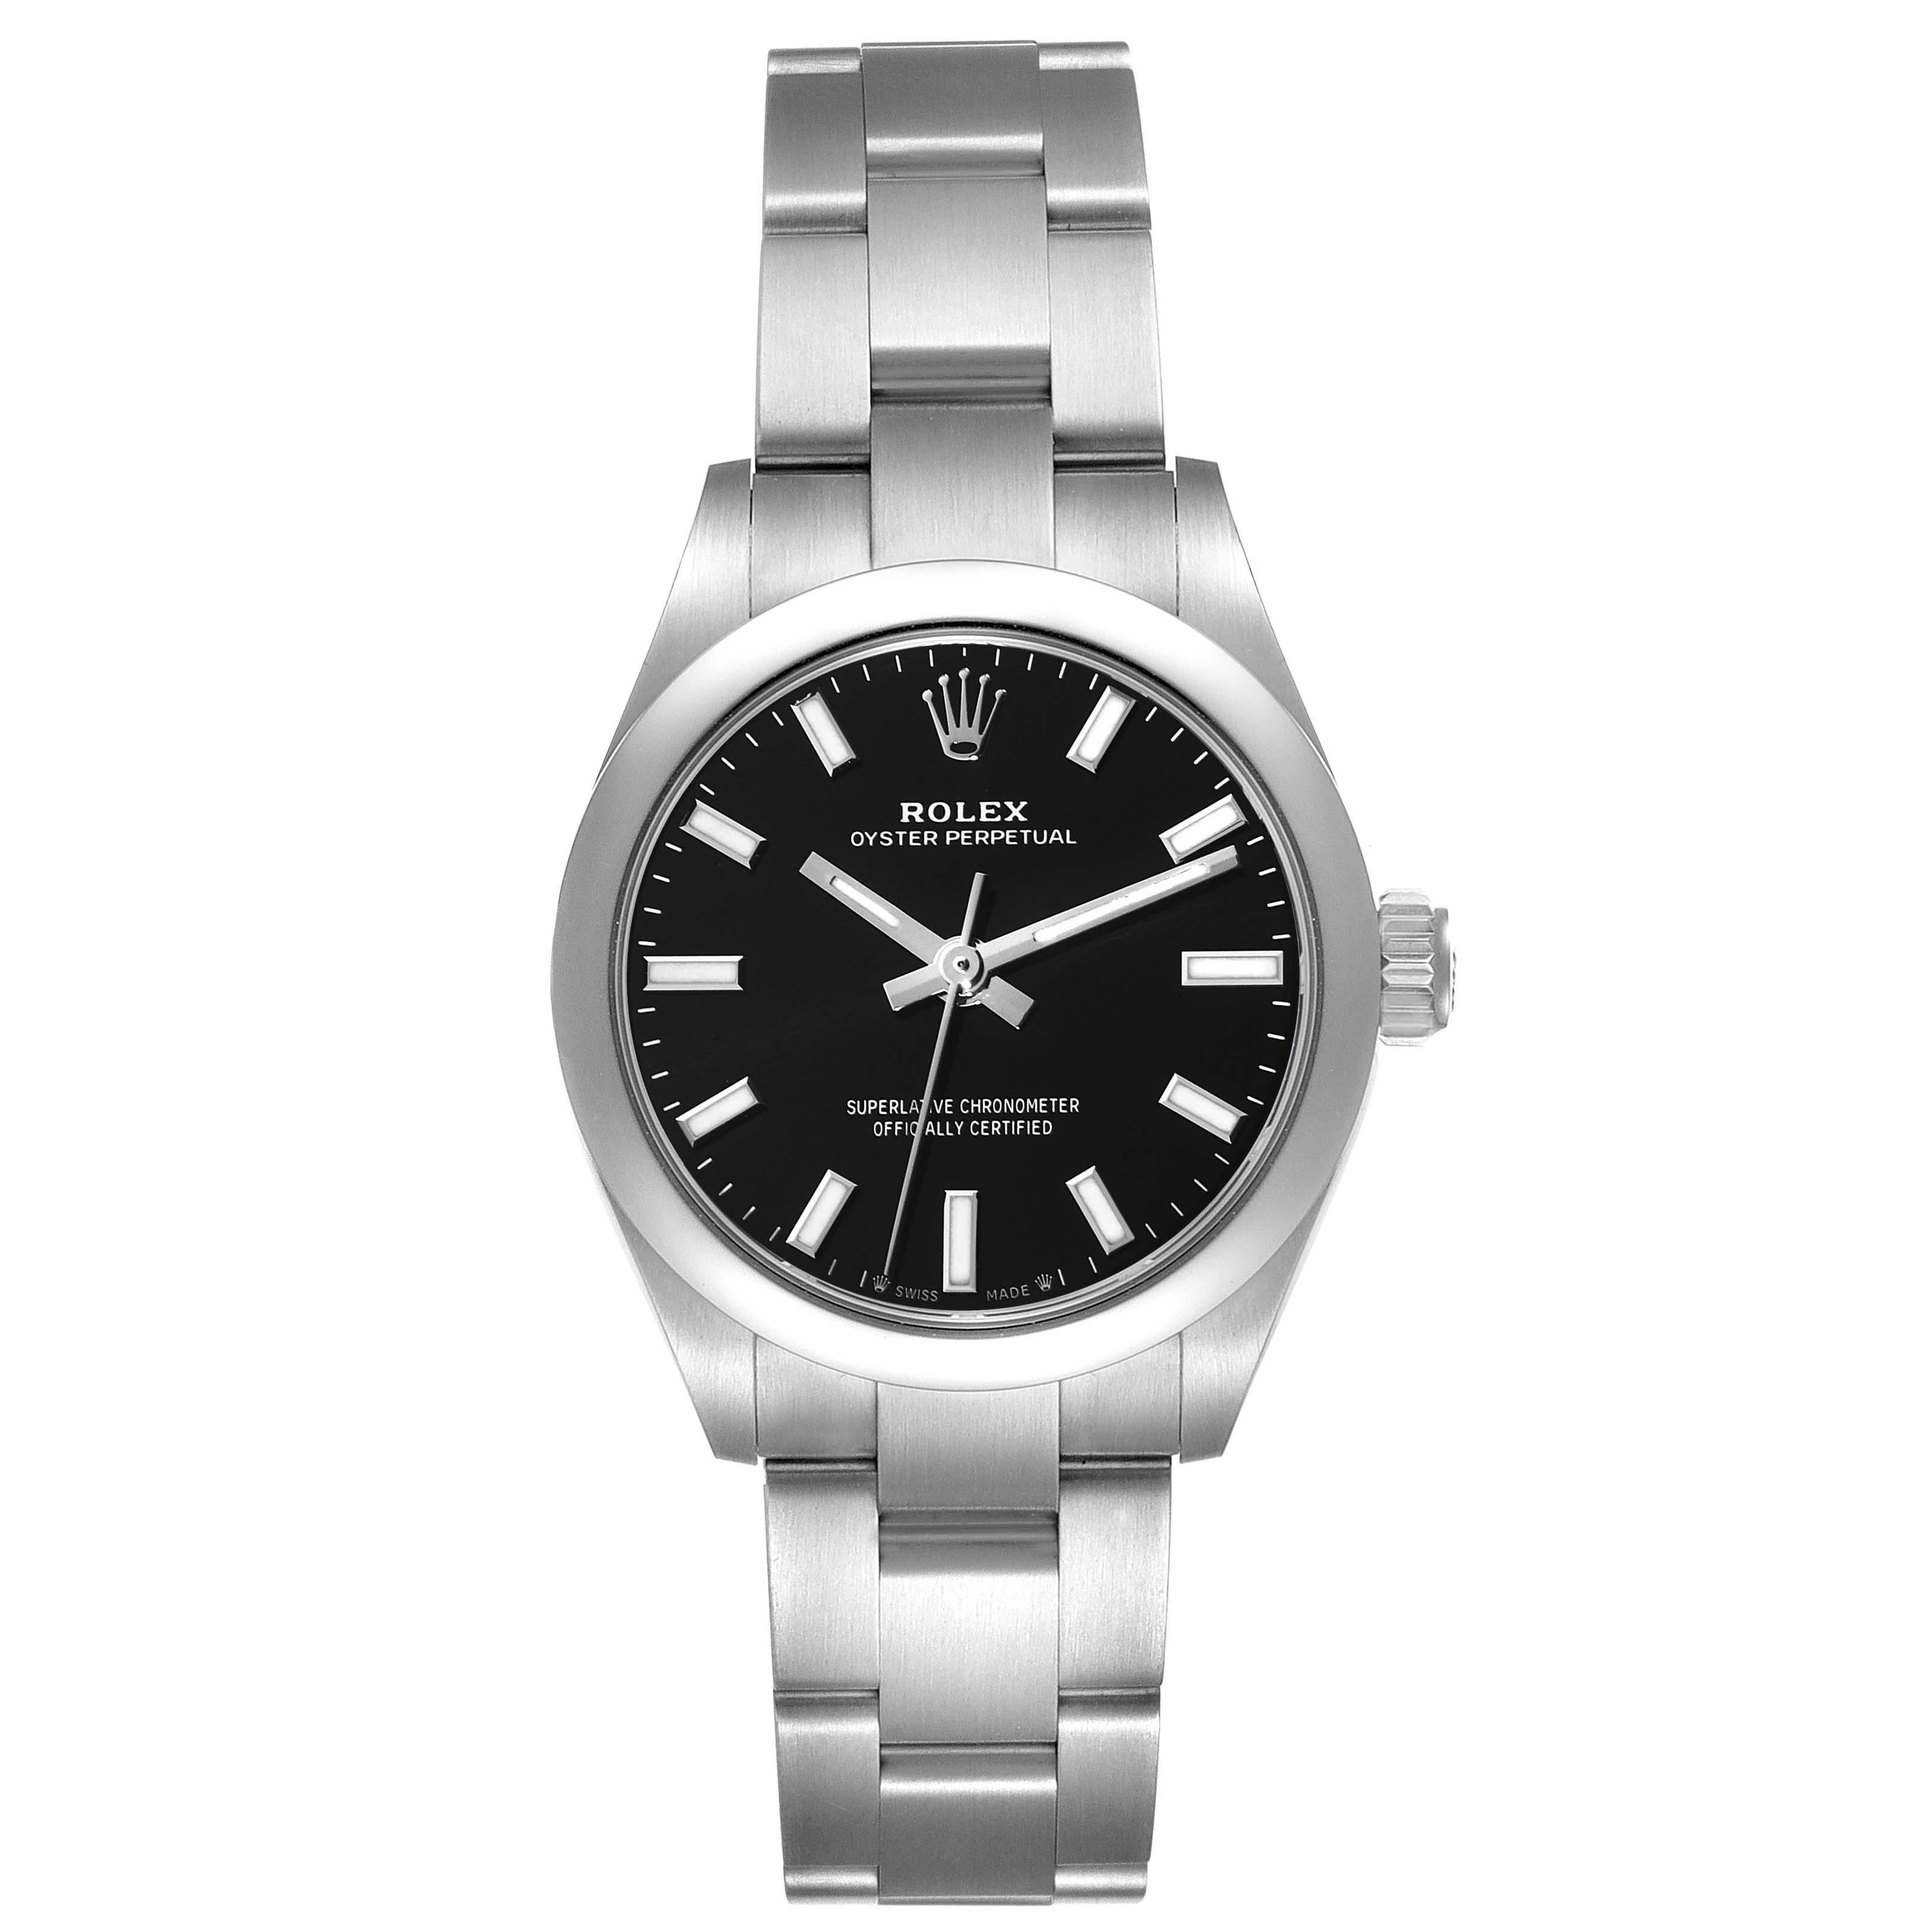 Rolex Oyster Perpetual Nondate Black Dial Steel Ladies Watch 276200 Box Card. Officially certified chronometer self-winding movement. Stainless steel oyster case 28 mm in diameter. Rolex logo on a crown. Stainless steel smooth domed bezel. Scratch